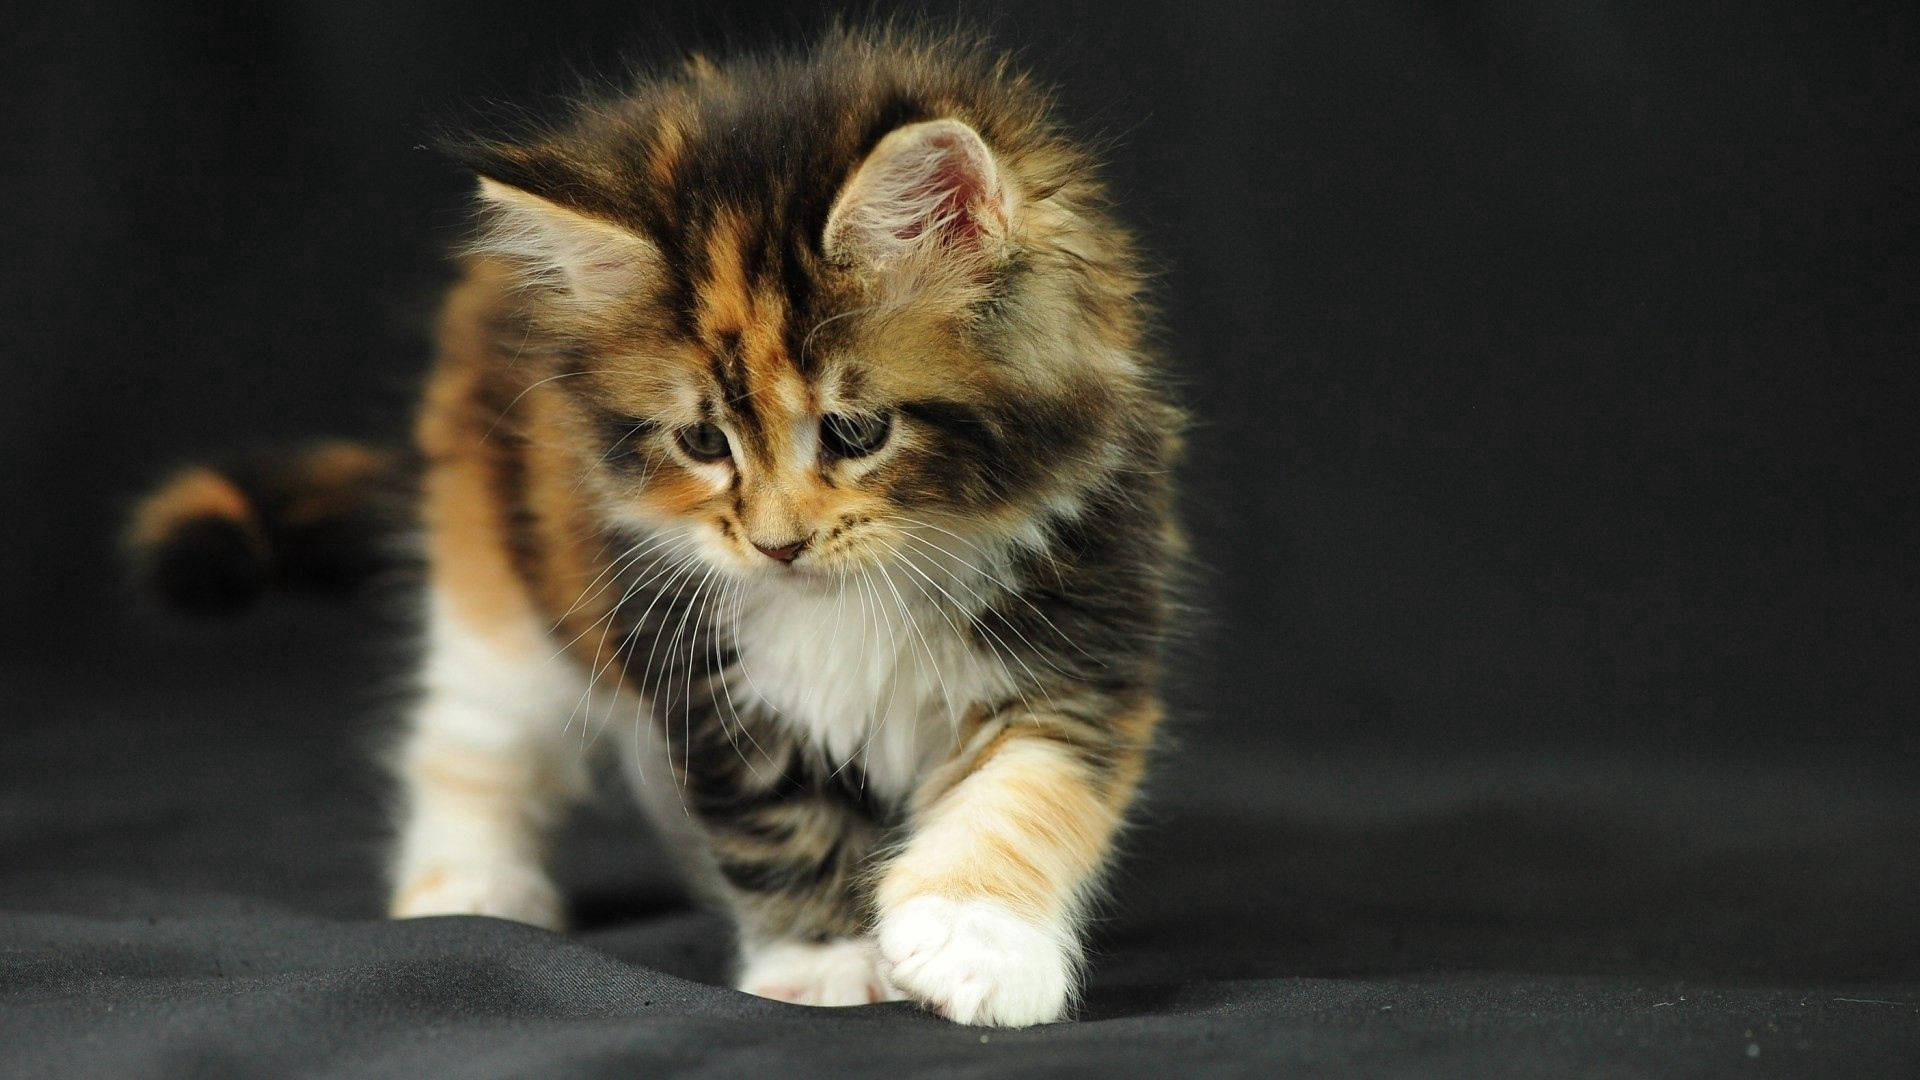 Cute Fluffy Kitten Snuggling With Its Toy Background